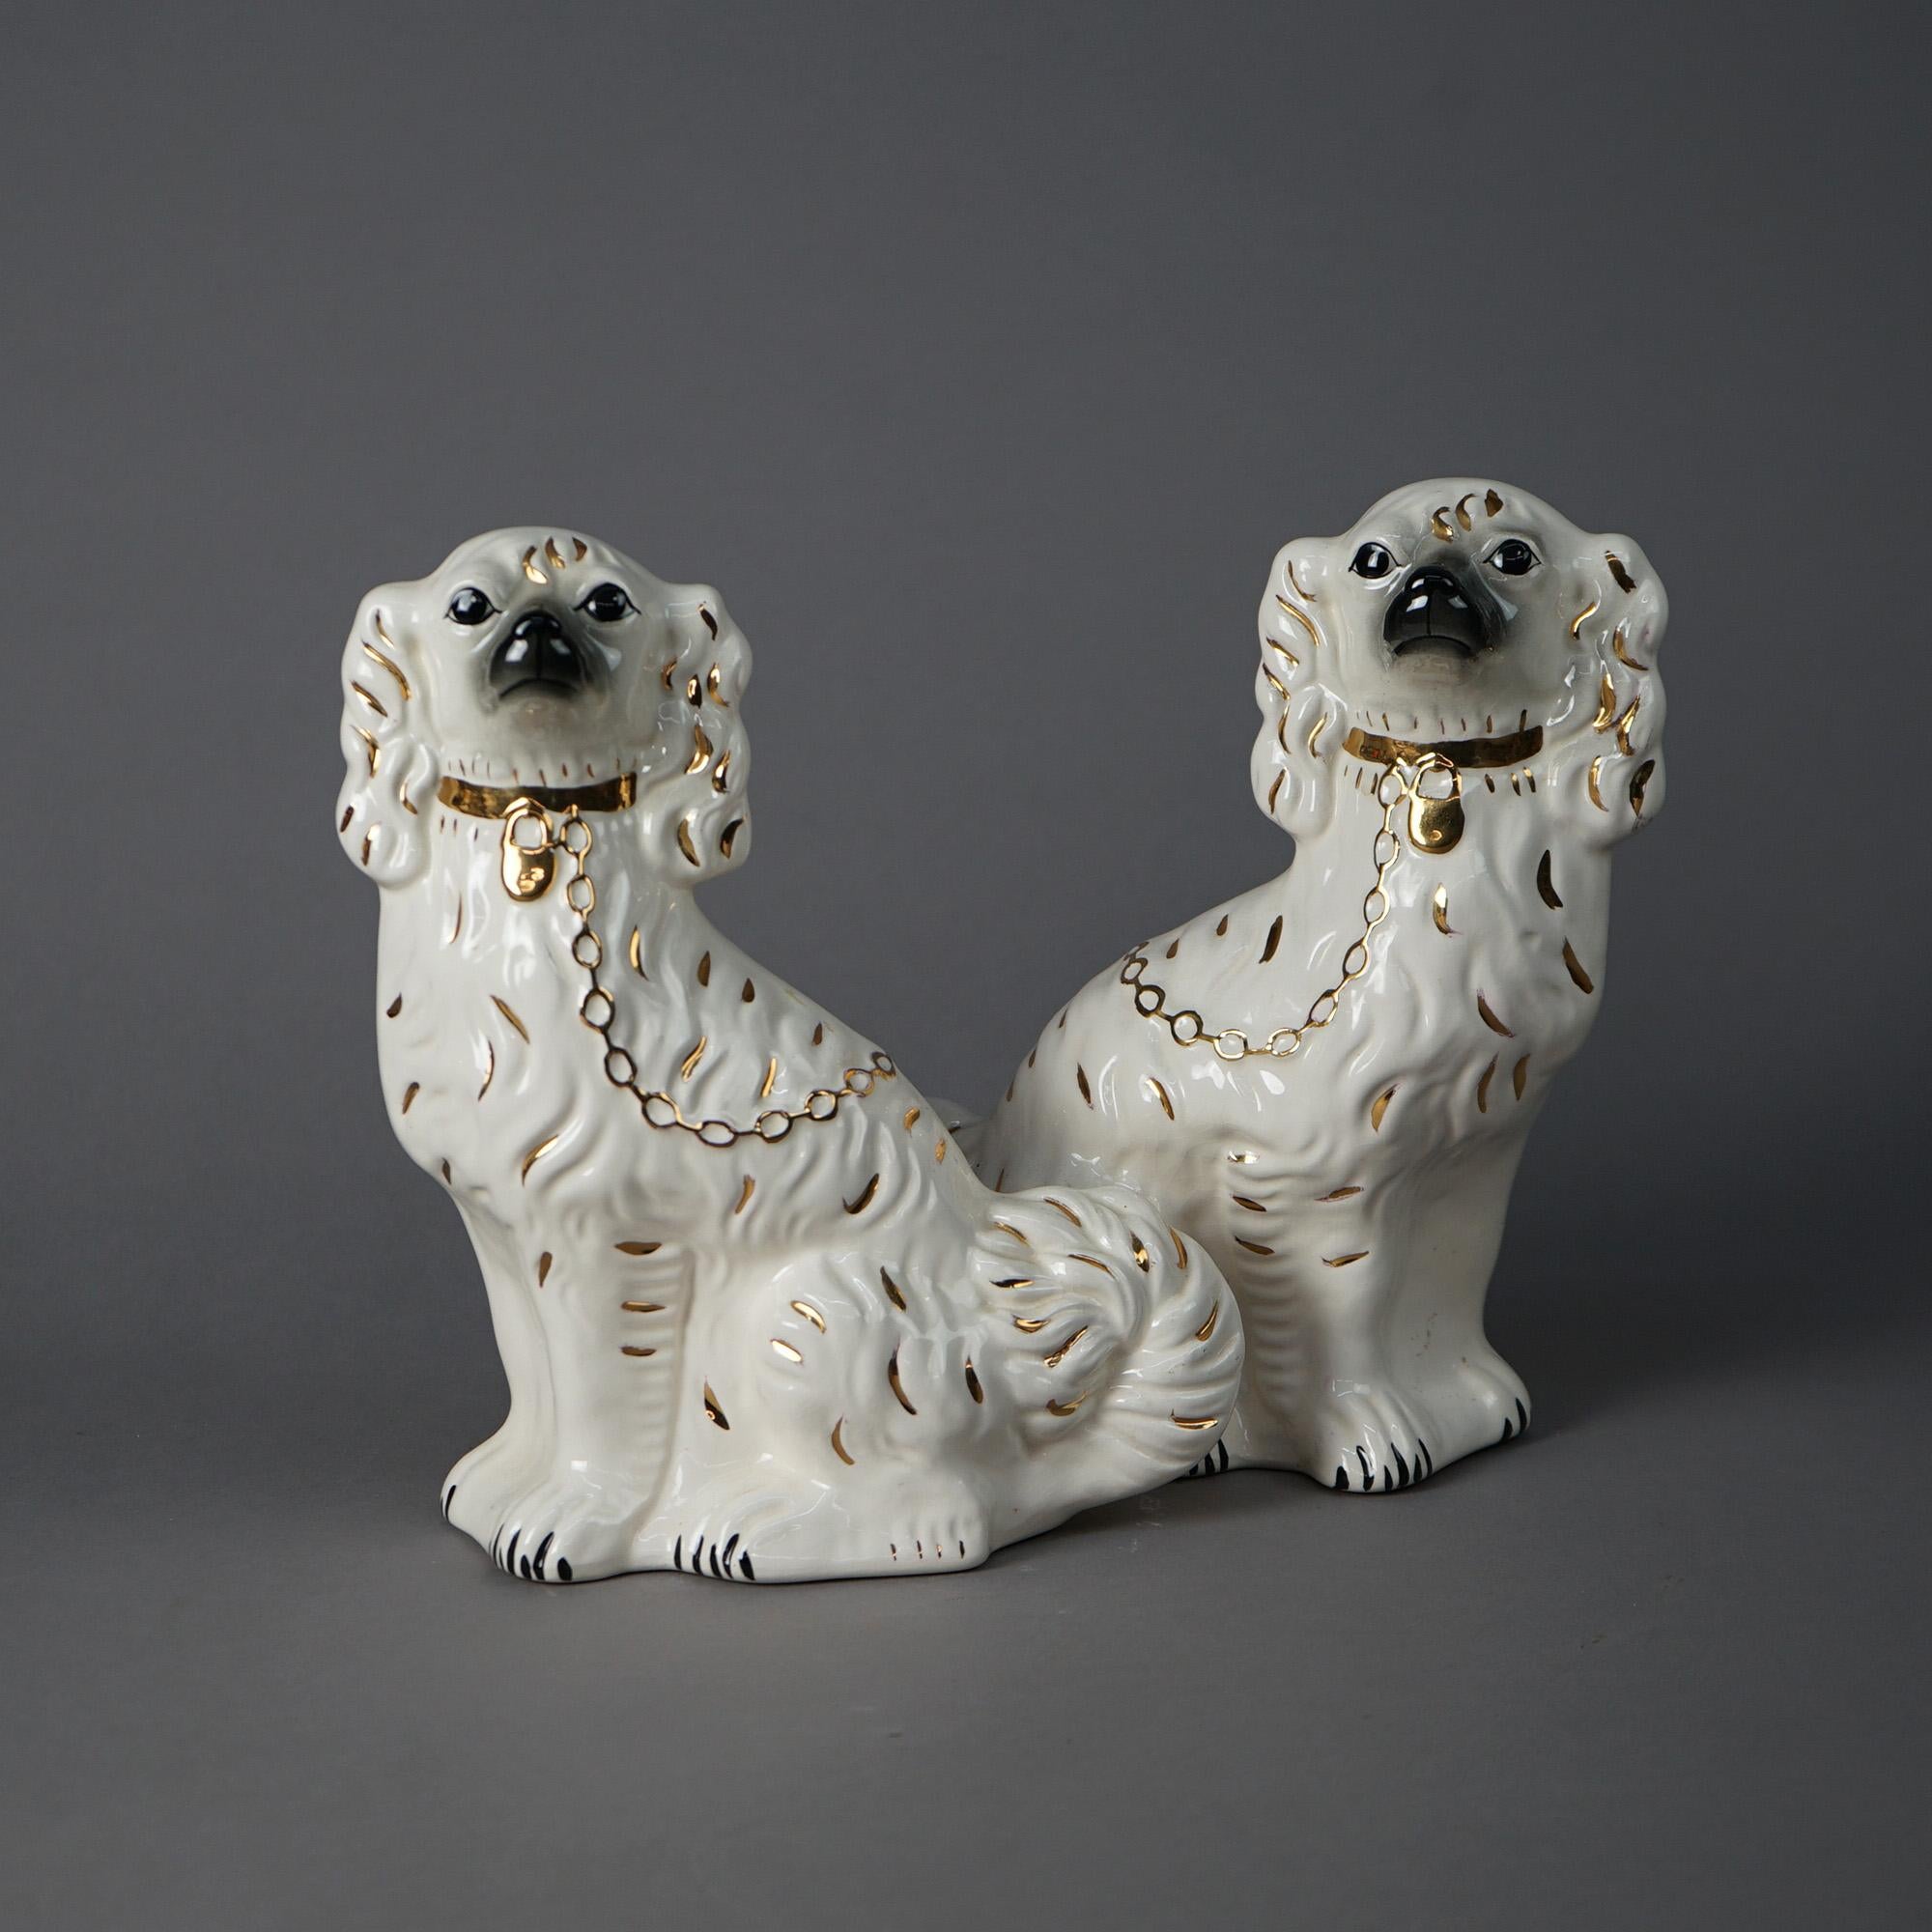 20th Century Antique Pair of English Staffordshire Porcelain Painted & Gilt Spaniels  20thC